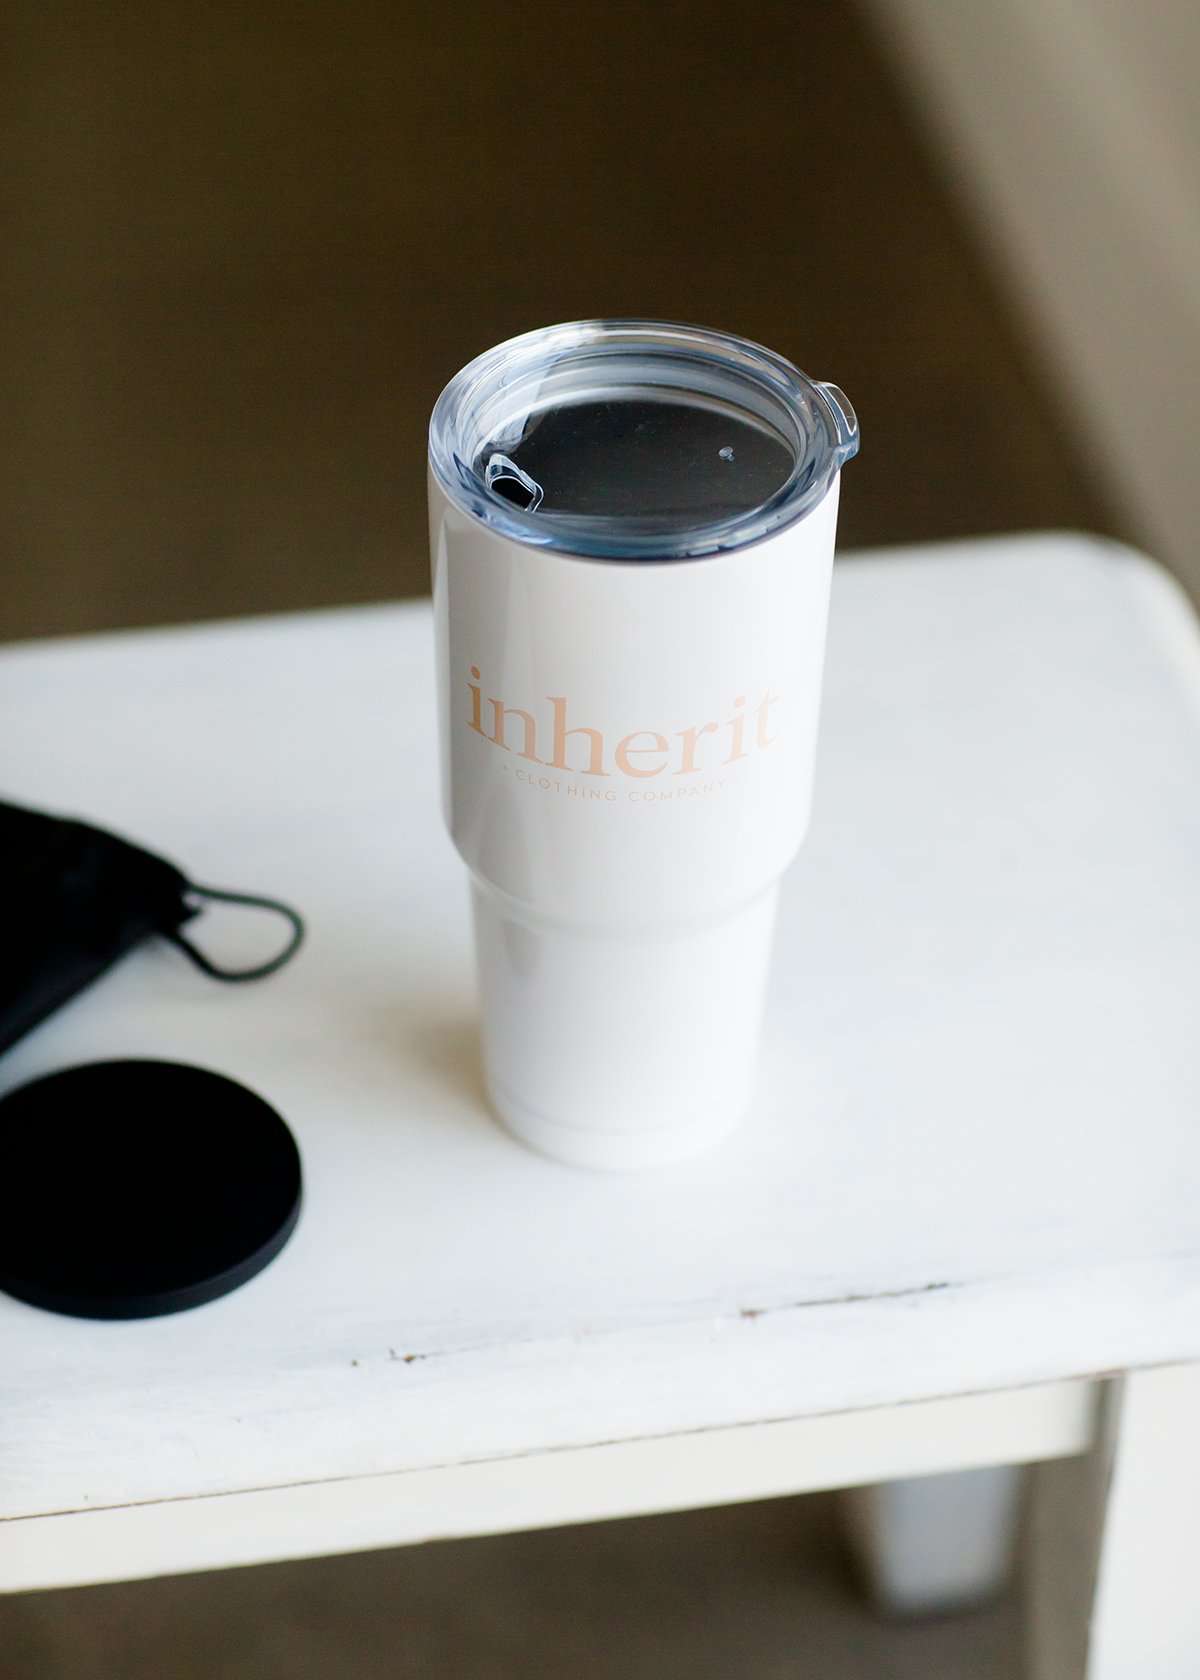 Inherit Double Wall Tumbler Home & Lifestyle